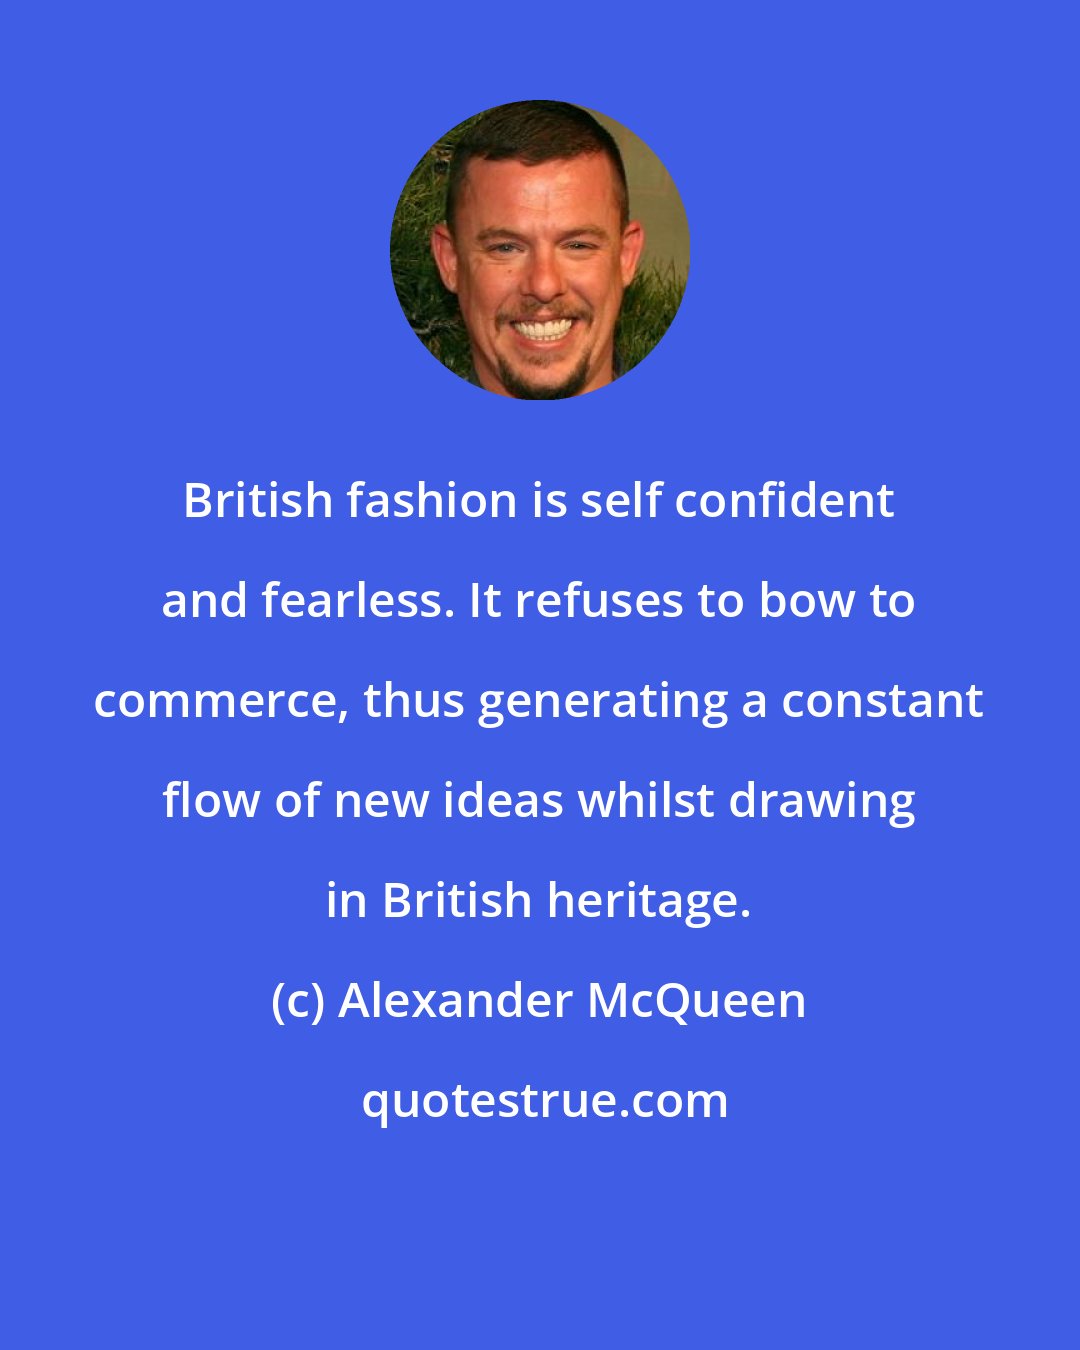 Alexander McQueen: British fashion is self confident and fearless. It refuses to bow to commerce, thus generating a constant flow of new ideas whilst drawing in British heritage.